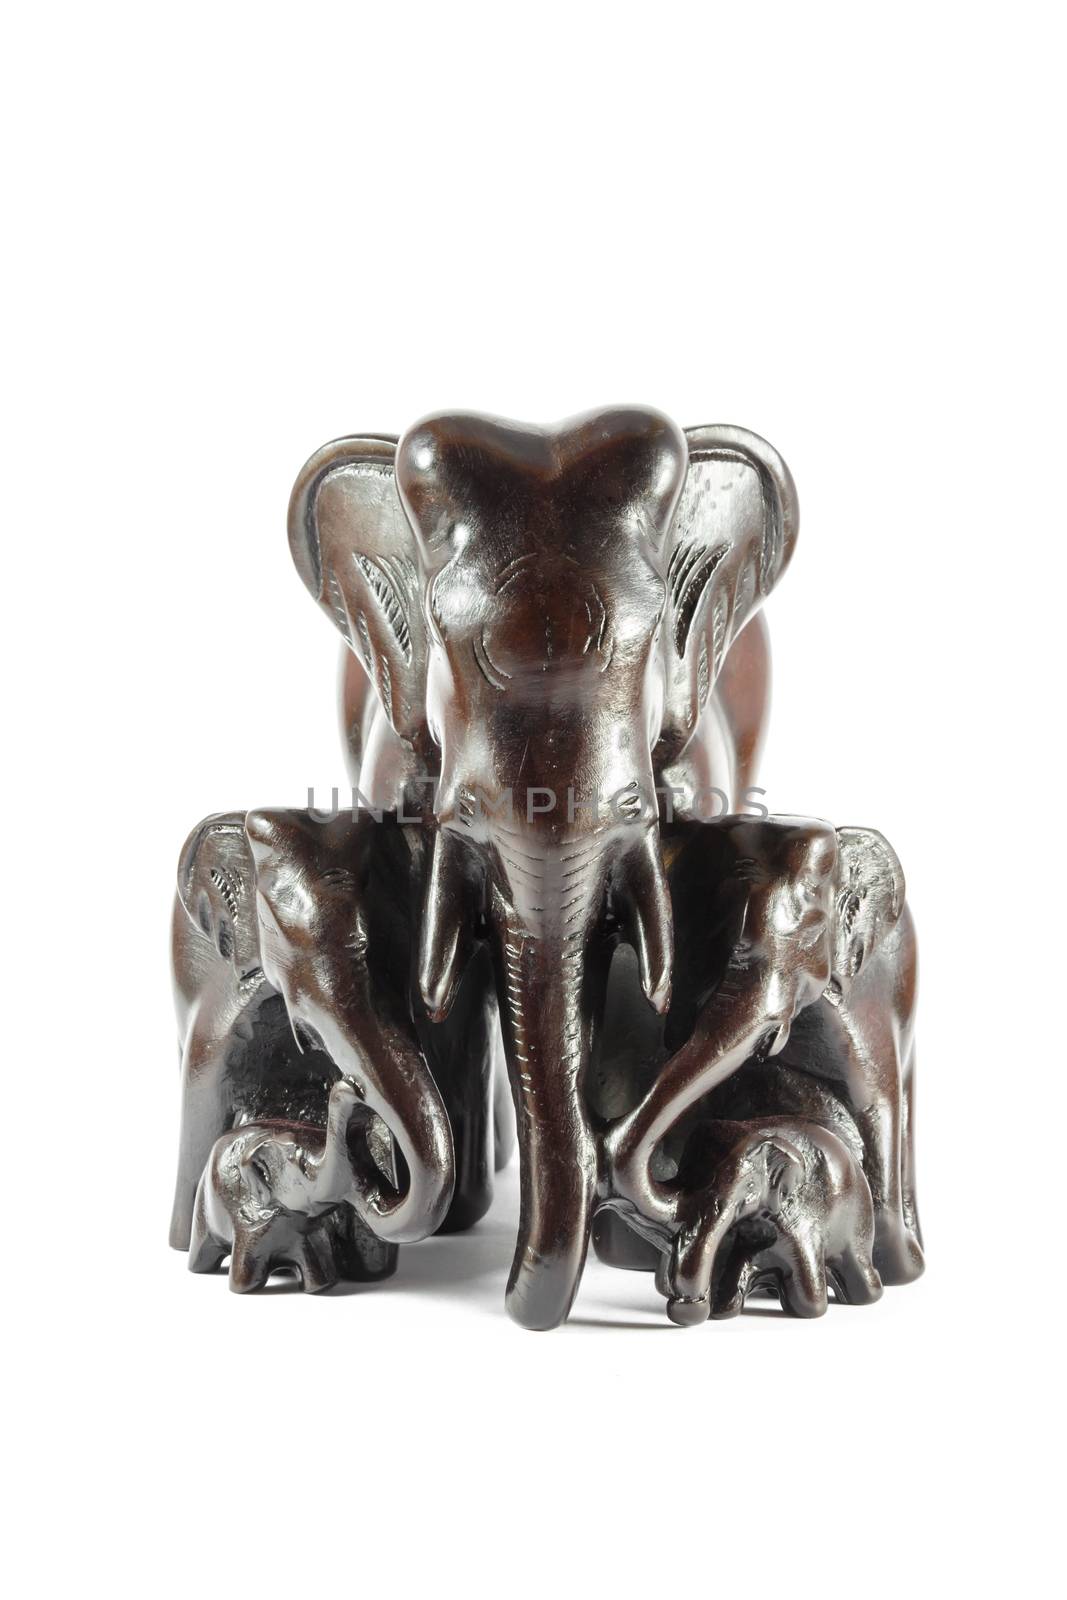 model of thai elephant's family made from resin on white background(isolated)